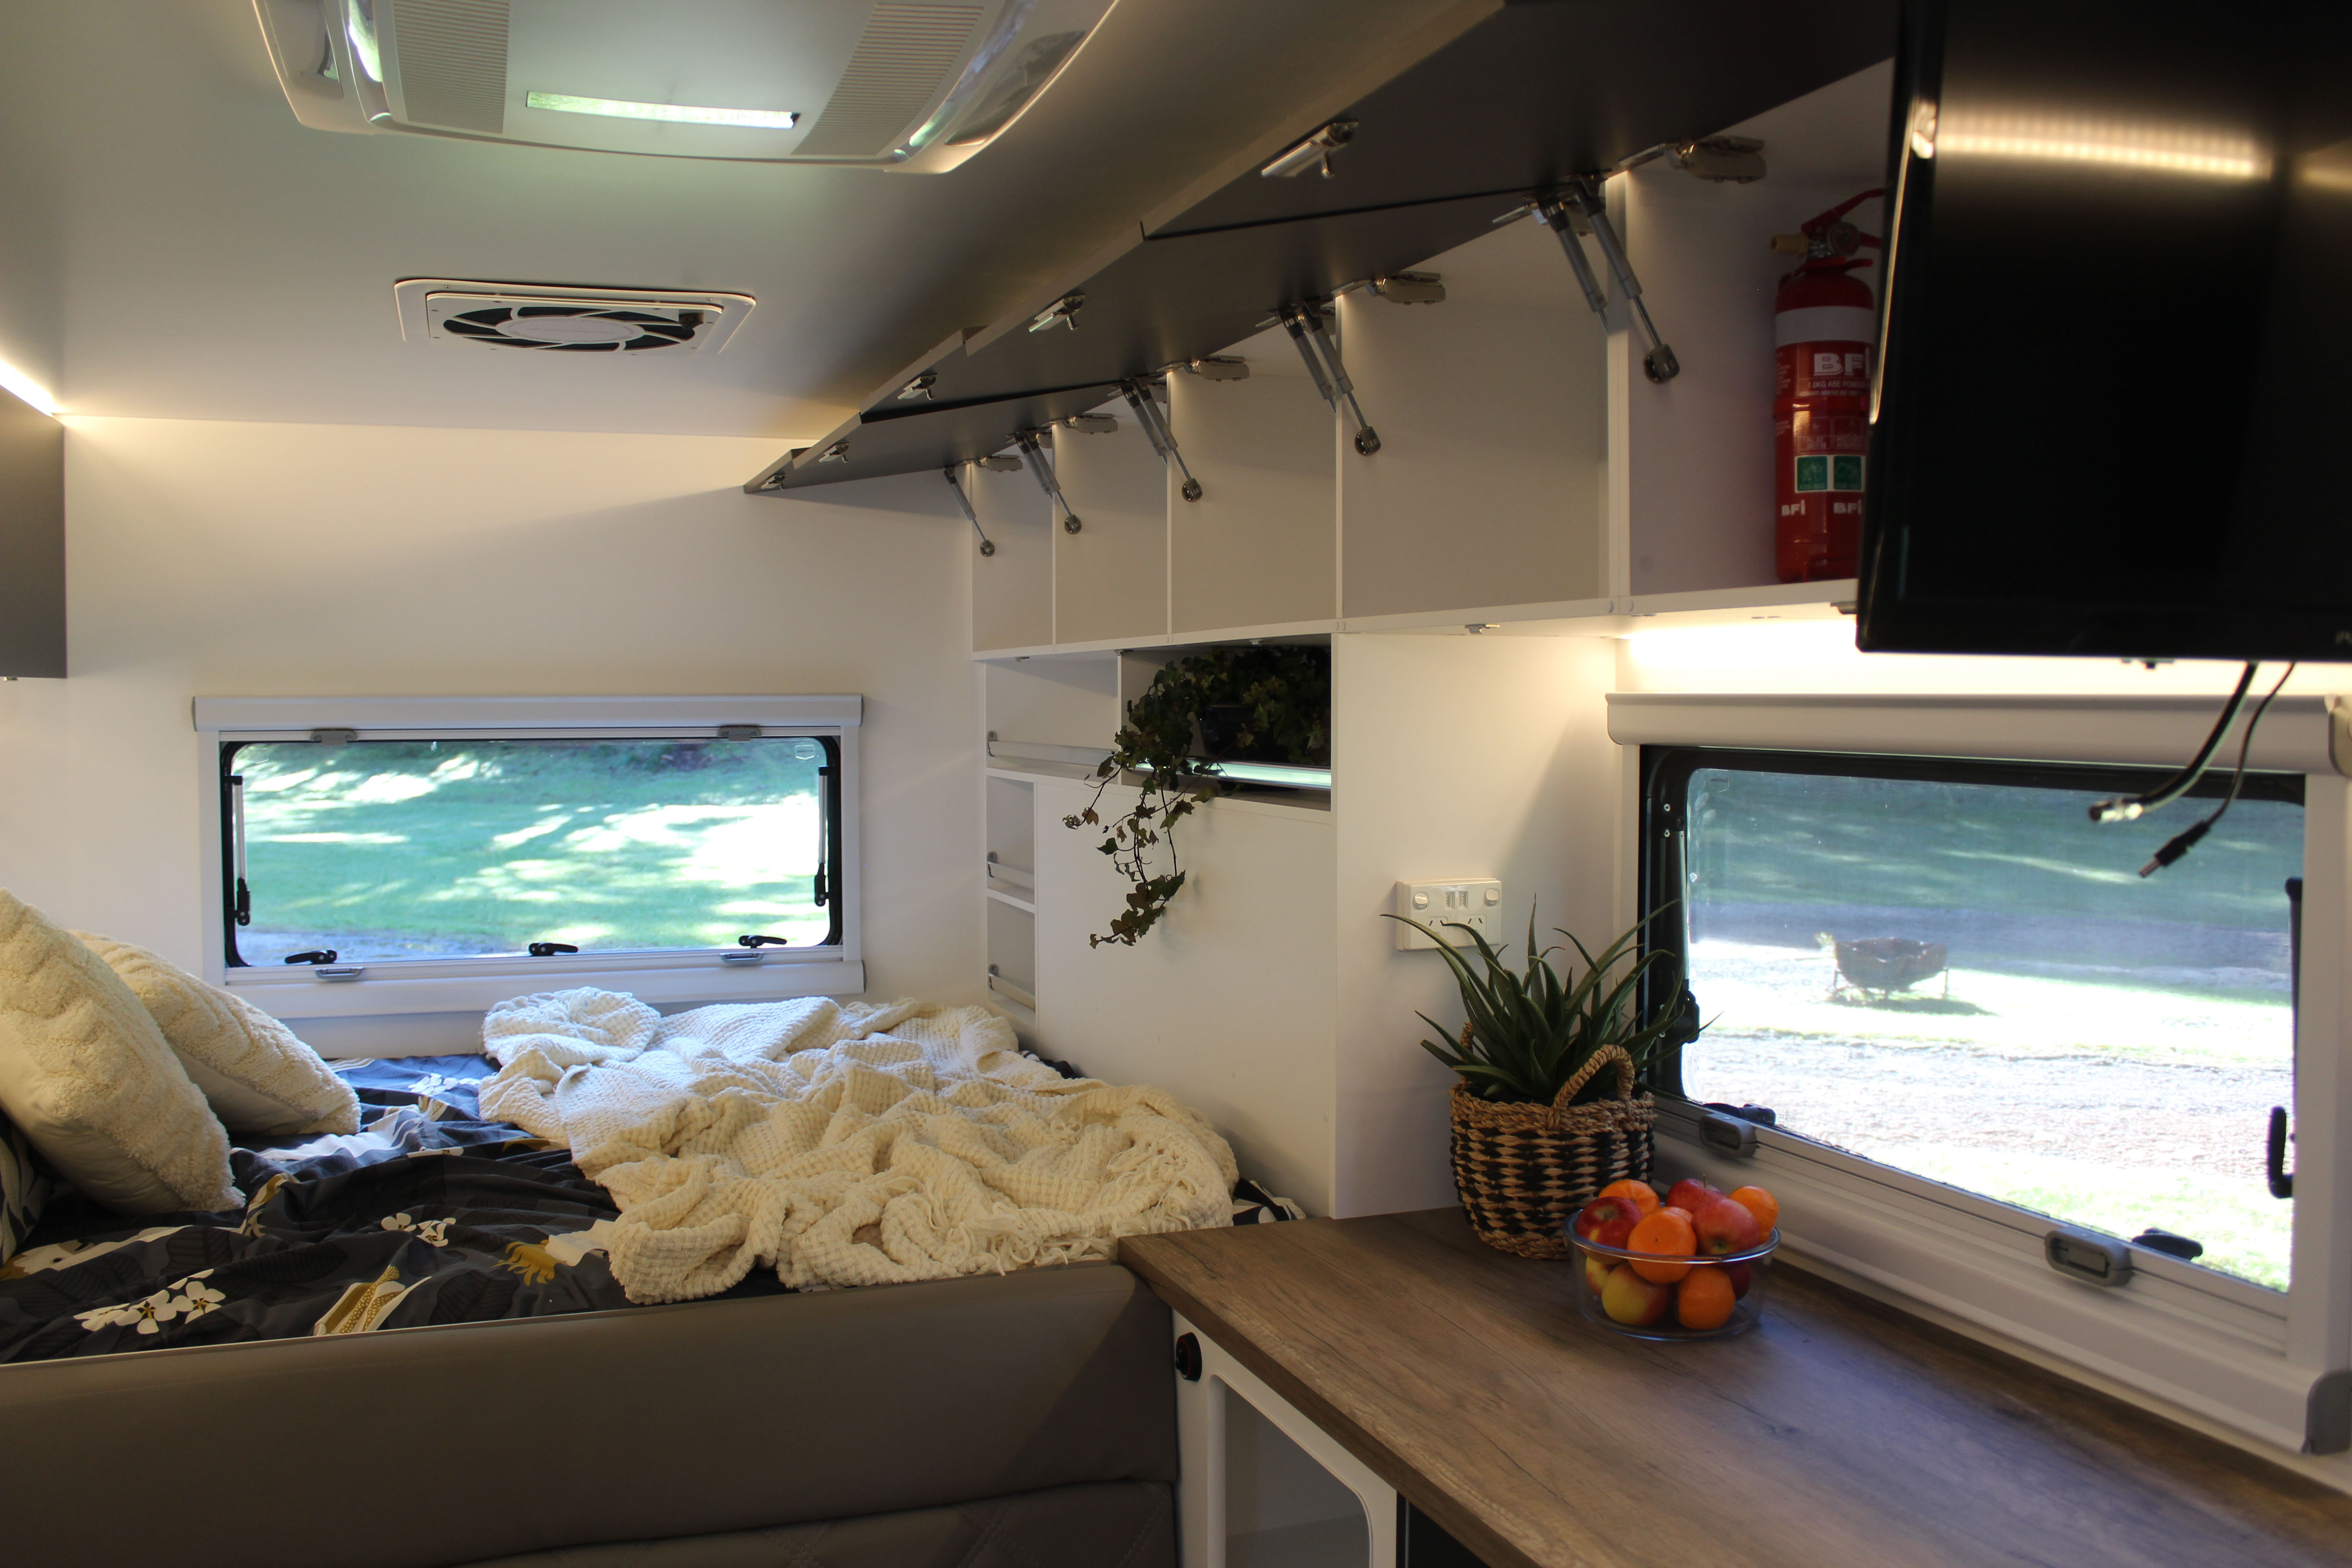 The interior of the Wallaroo, with generous storage space on display